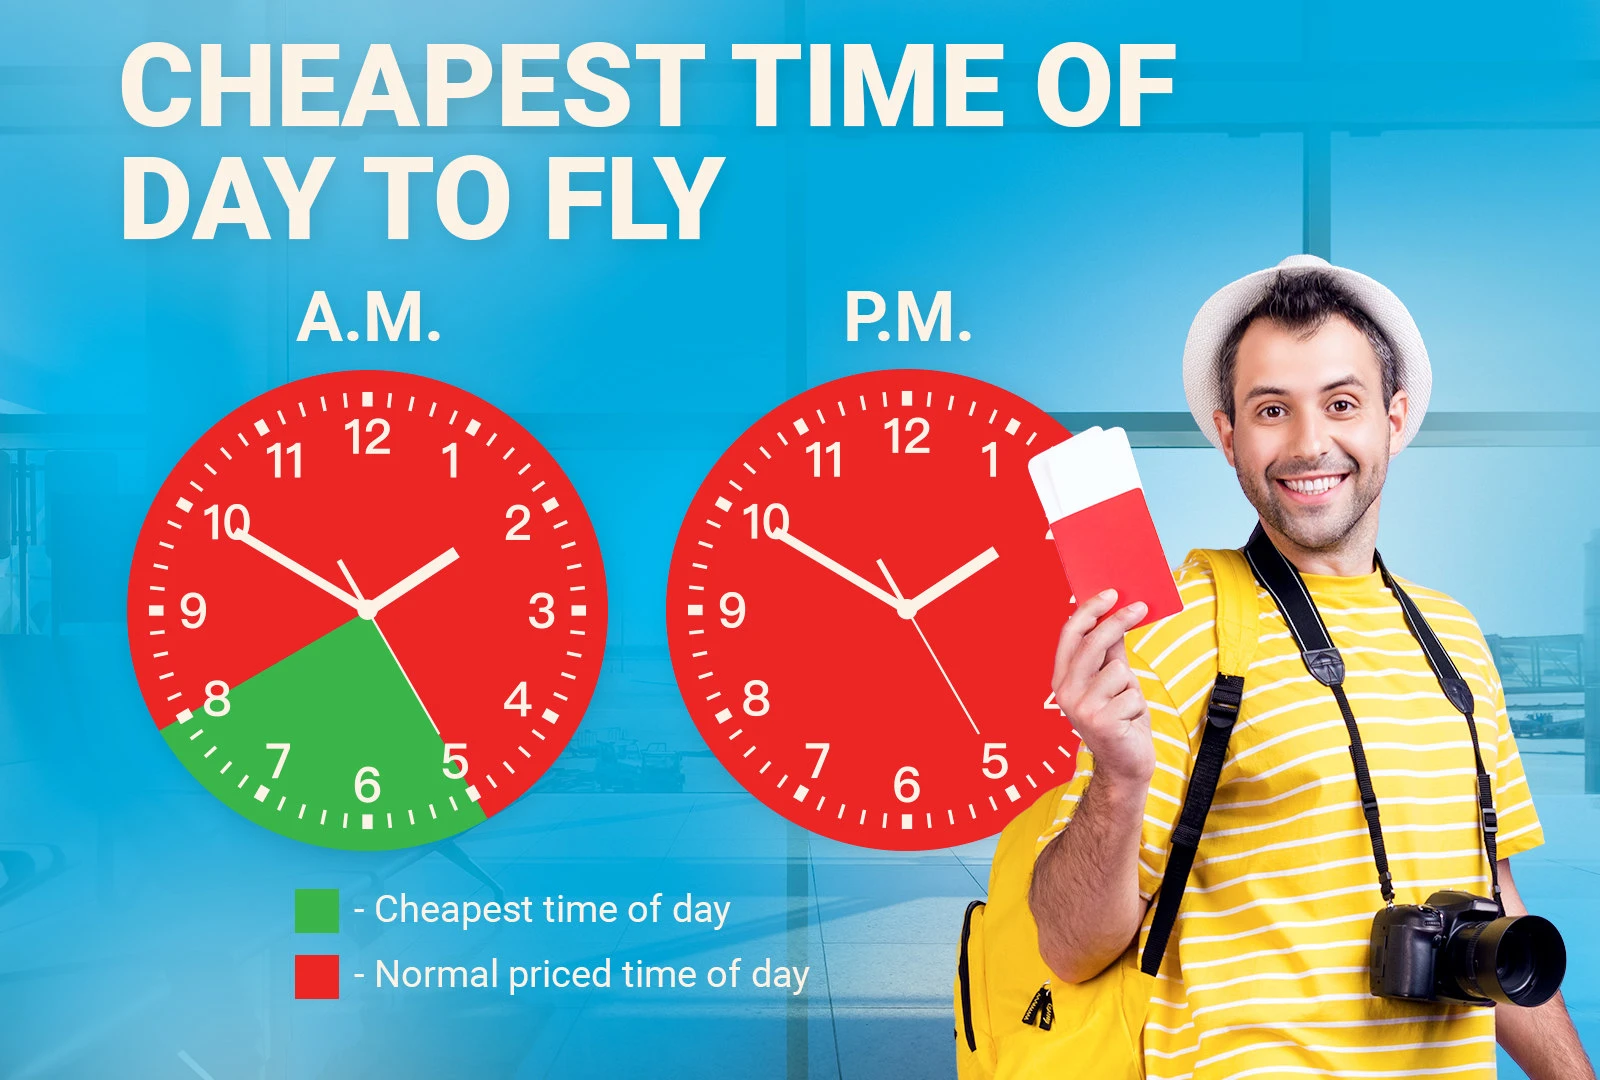 The cheapest time of day to fly in a graphic image with a man holding a ticket next to it